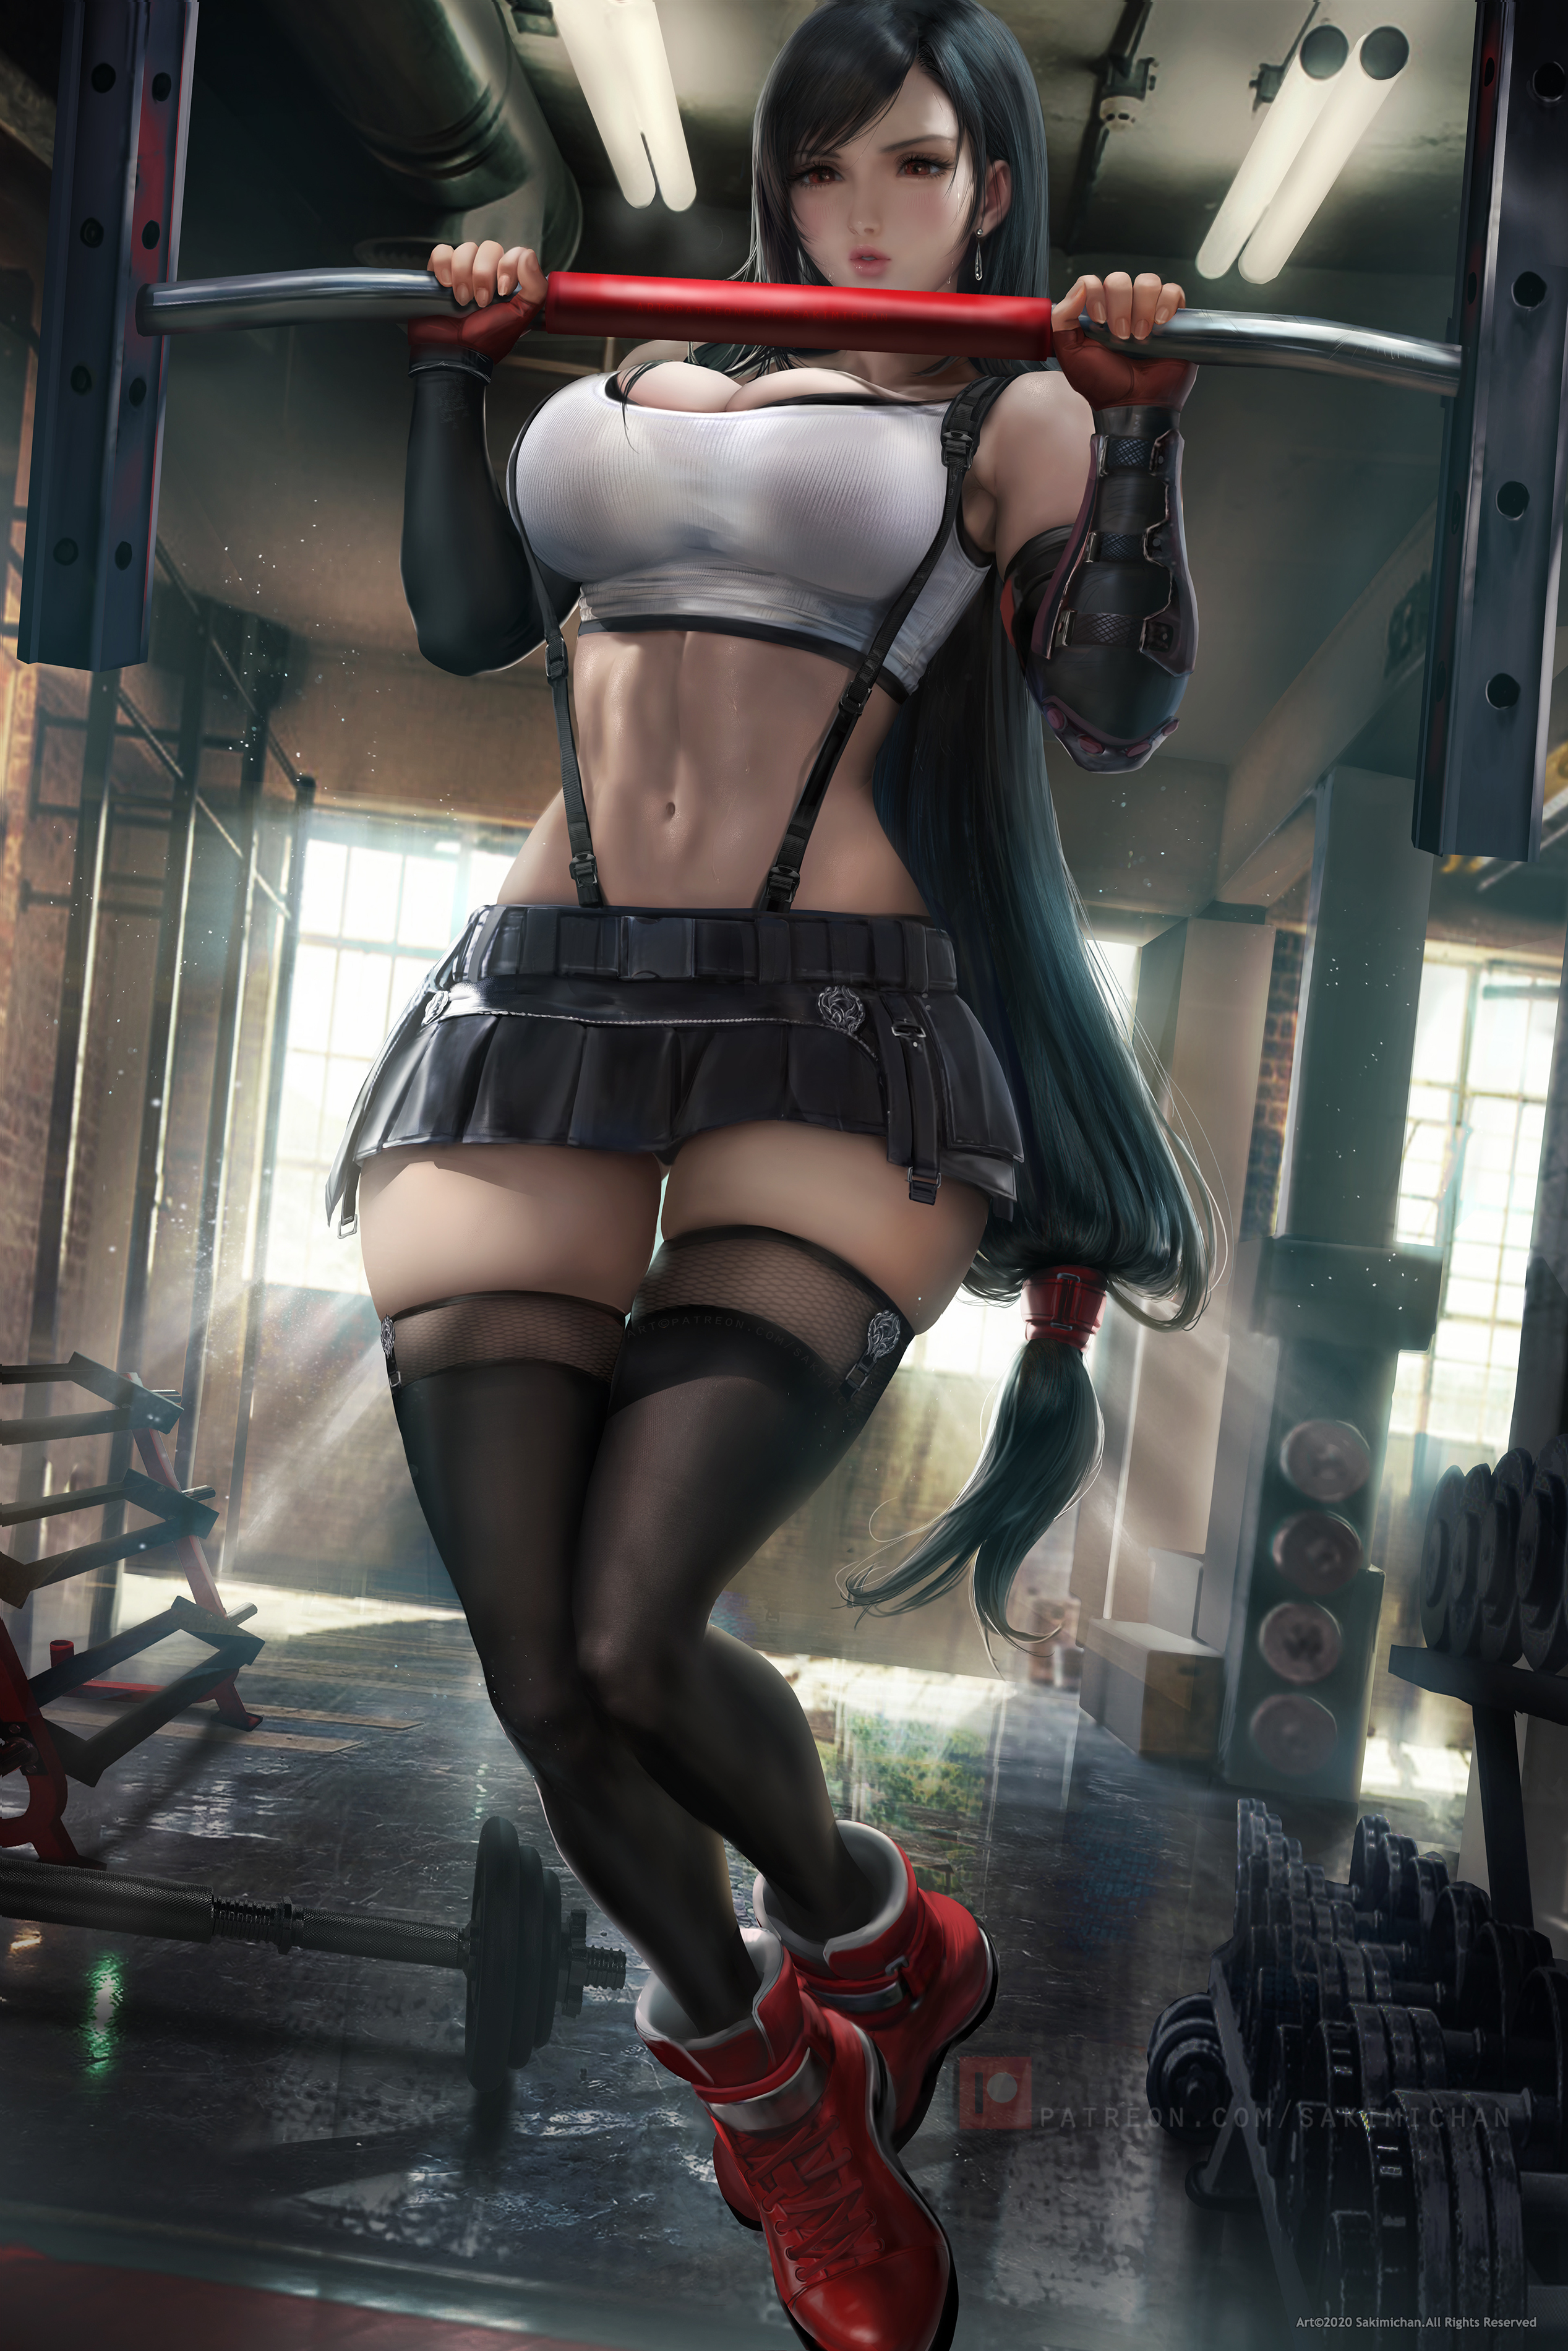 General 2535x3800 women fictional character exercise arm warmers cleavage suspenders belly miniskirt the gap thick thigh thigh-highs stockings black stockings boots red boots wide hips curvy video game characters video game girls fan art artwork drawing digital art illustration red eyes blushing sweat parted lips fishnet